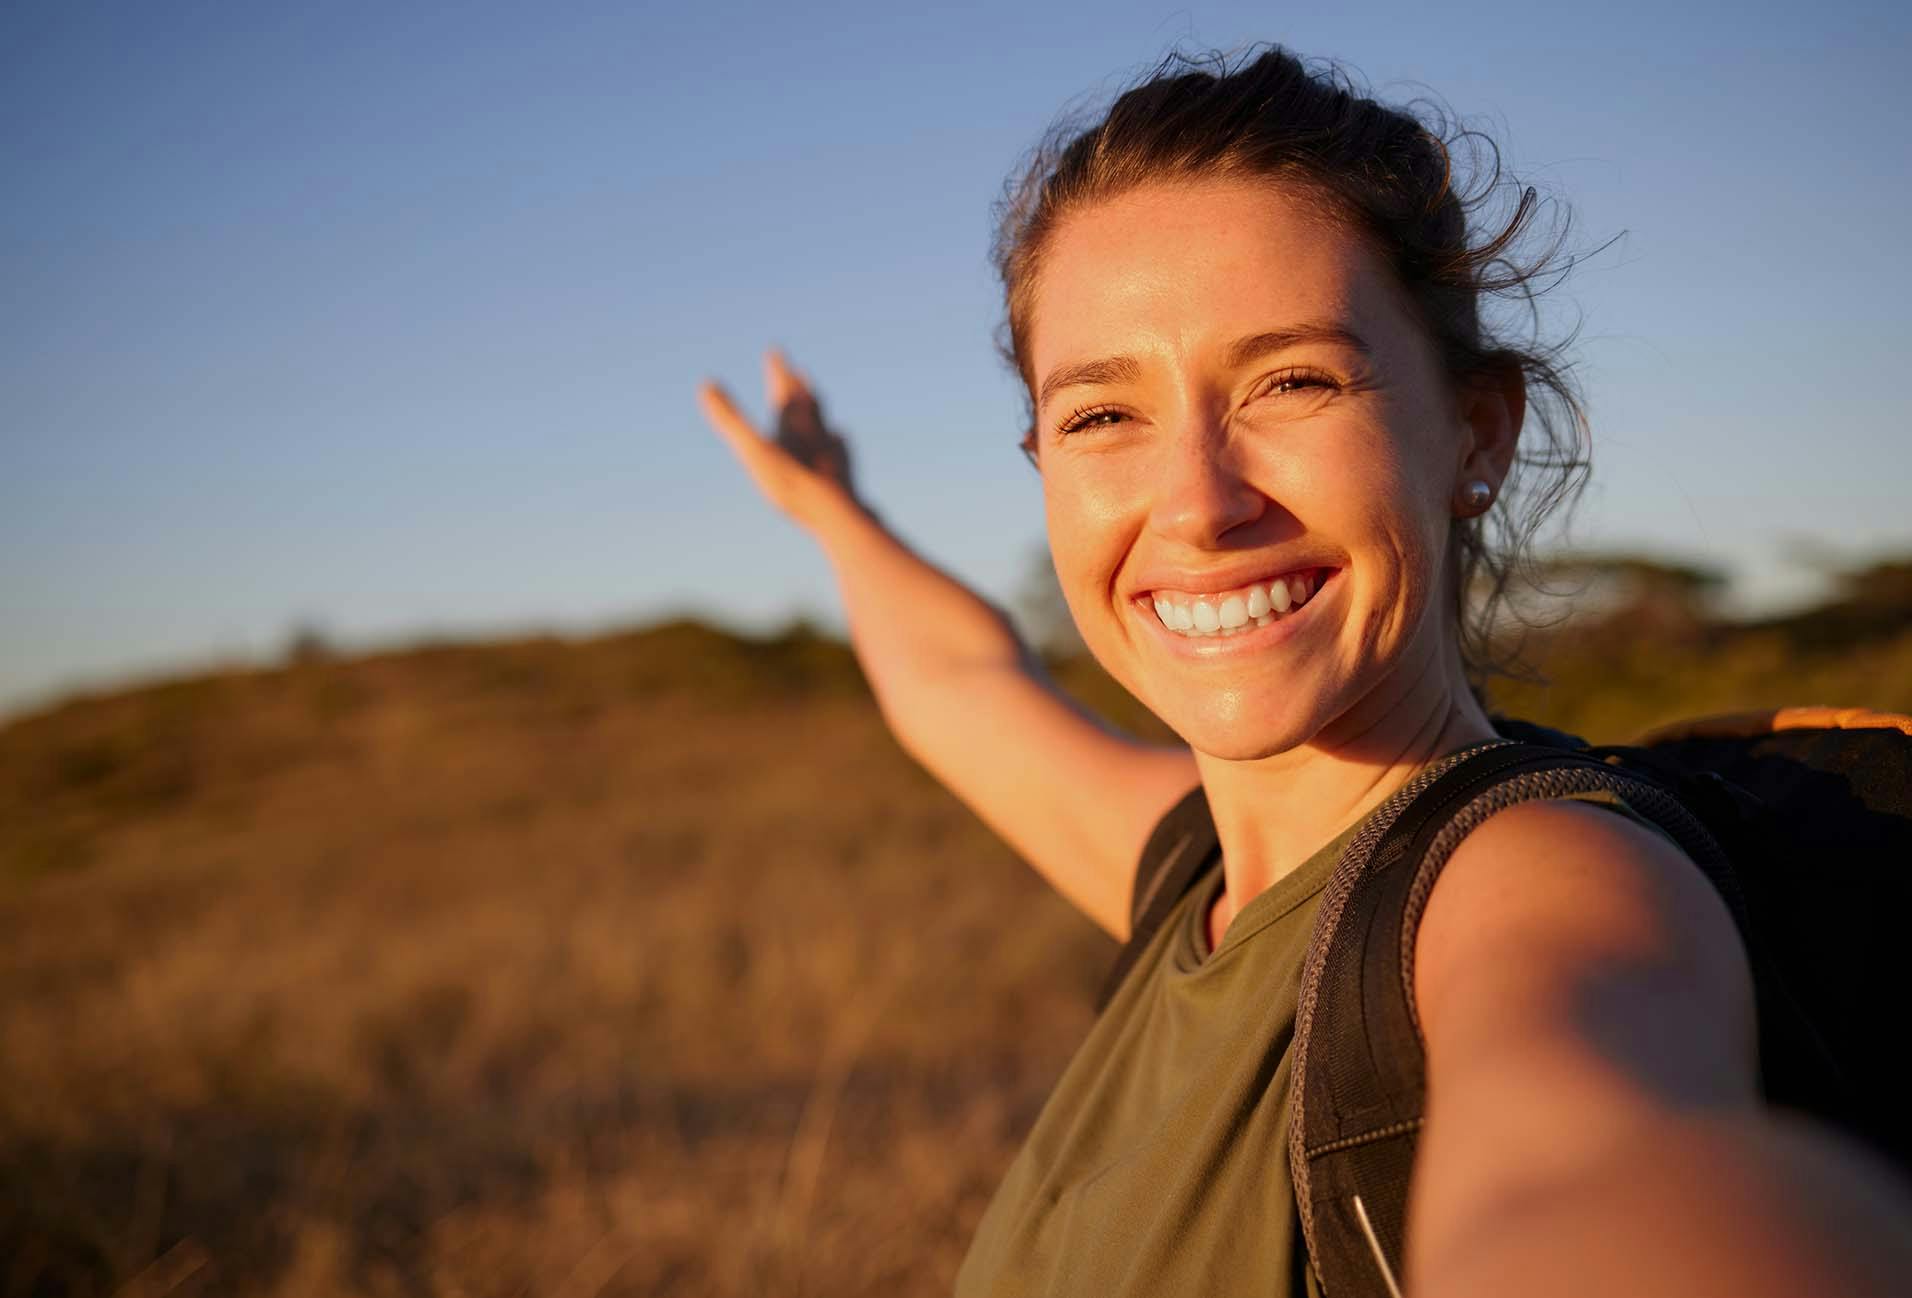 smiling woman with arms outstretched in a field of grass